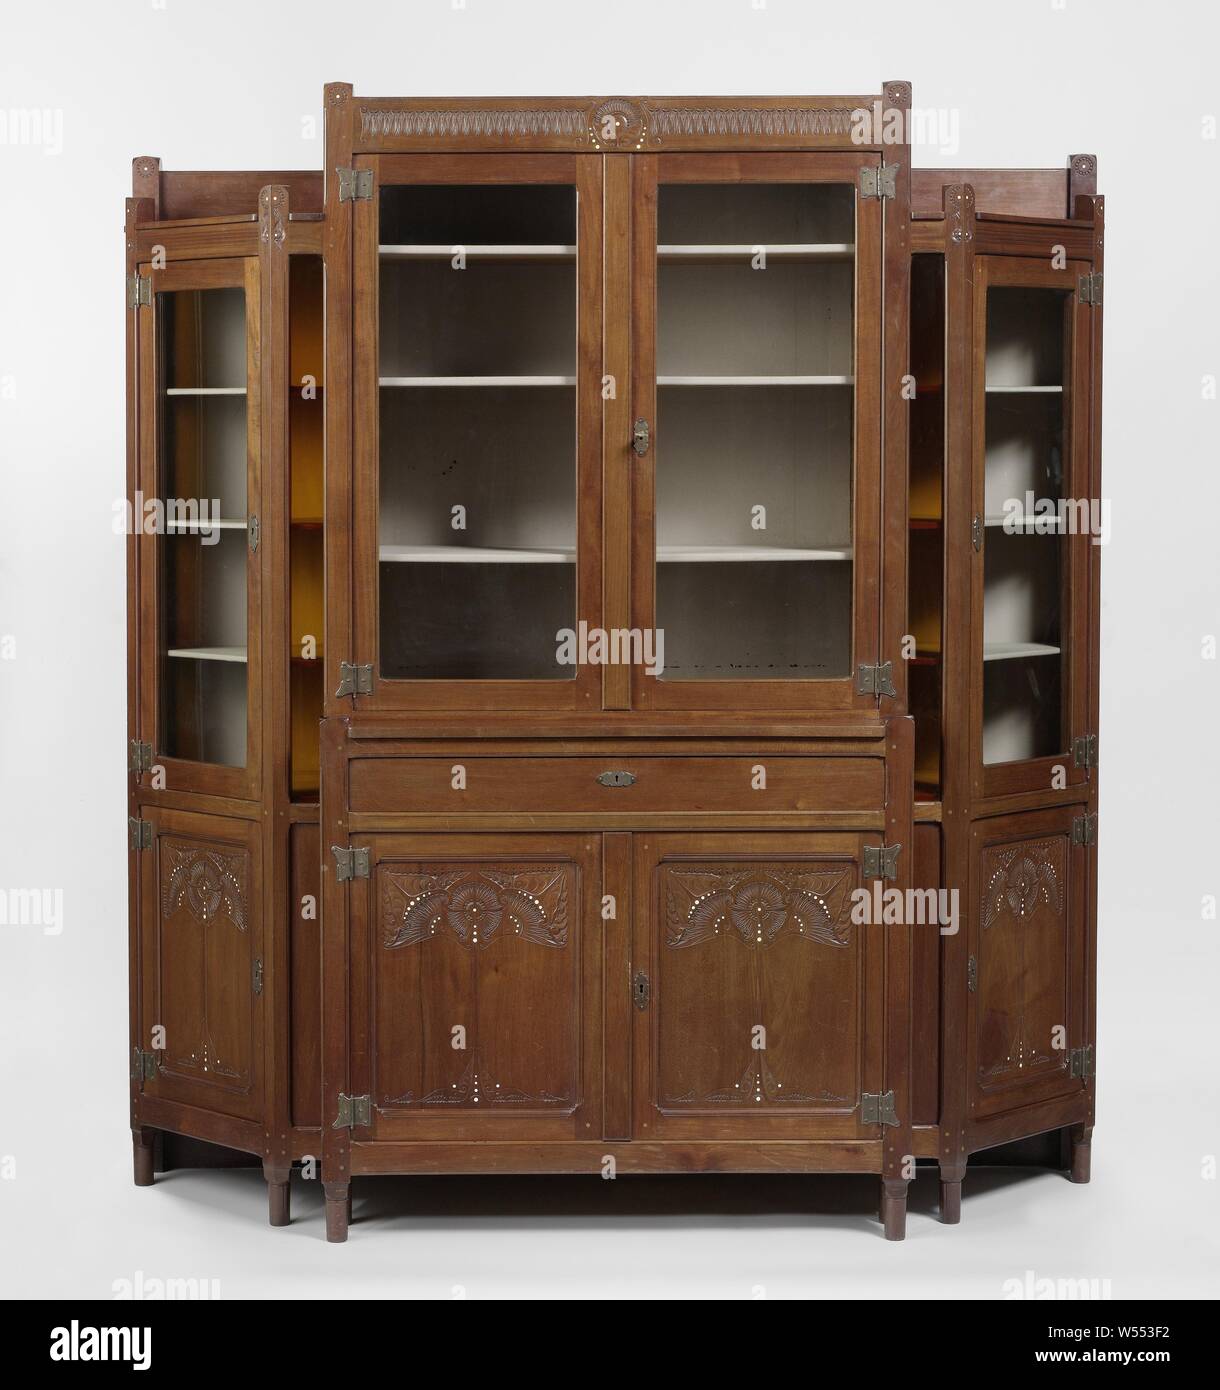 Display case consisting of a central part and two obliquely placed side parts with carved floral motifs, Display case of mahogany consisting of a central part and two angled pentagonal side parts resting on slender high legs. The middle part consists of a lower cabinet with two doors and above a drawer and a recessed upper cabinet with two high windows and a frieze. The receding side parts, which are lower than the middle part, consist of a door with a high window above them and are flanked by obliquely placed narrow parts consisting of a panel with a high window above it. There is a raised Stock Photo